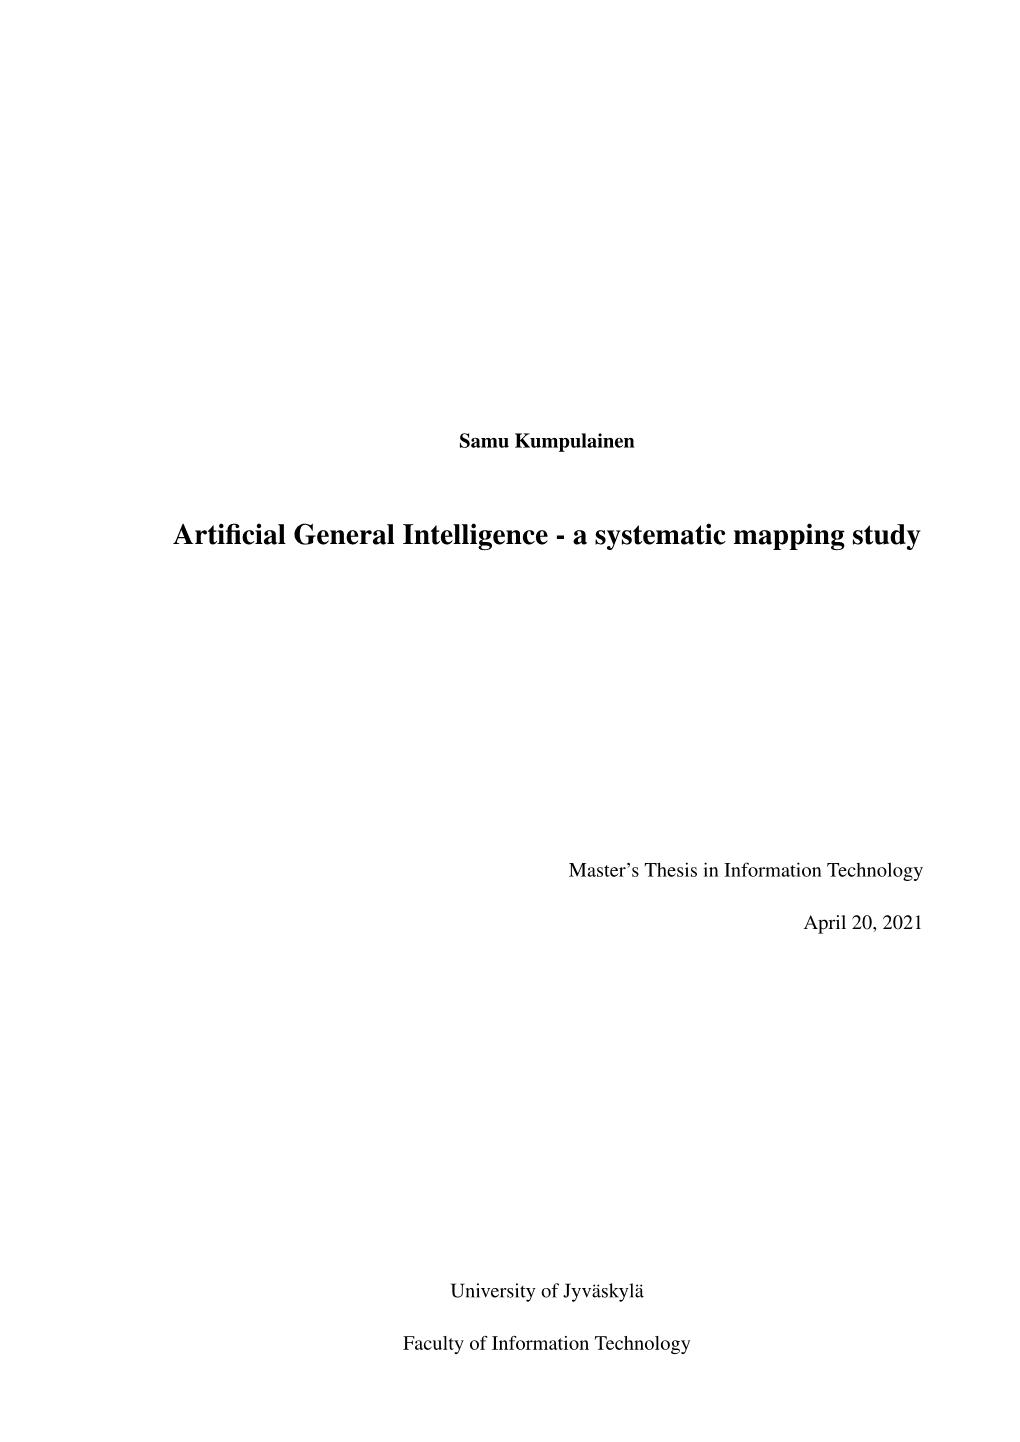 Artificial General Intelligence - a Systematic Mapping Study